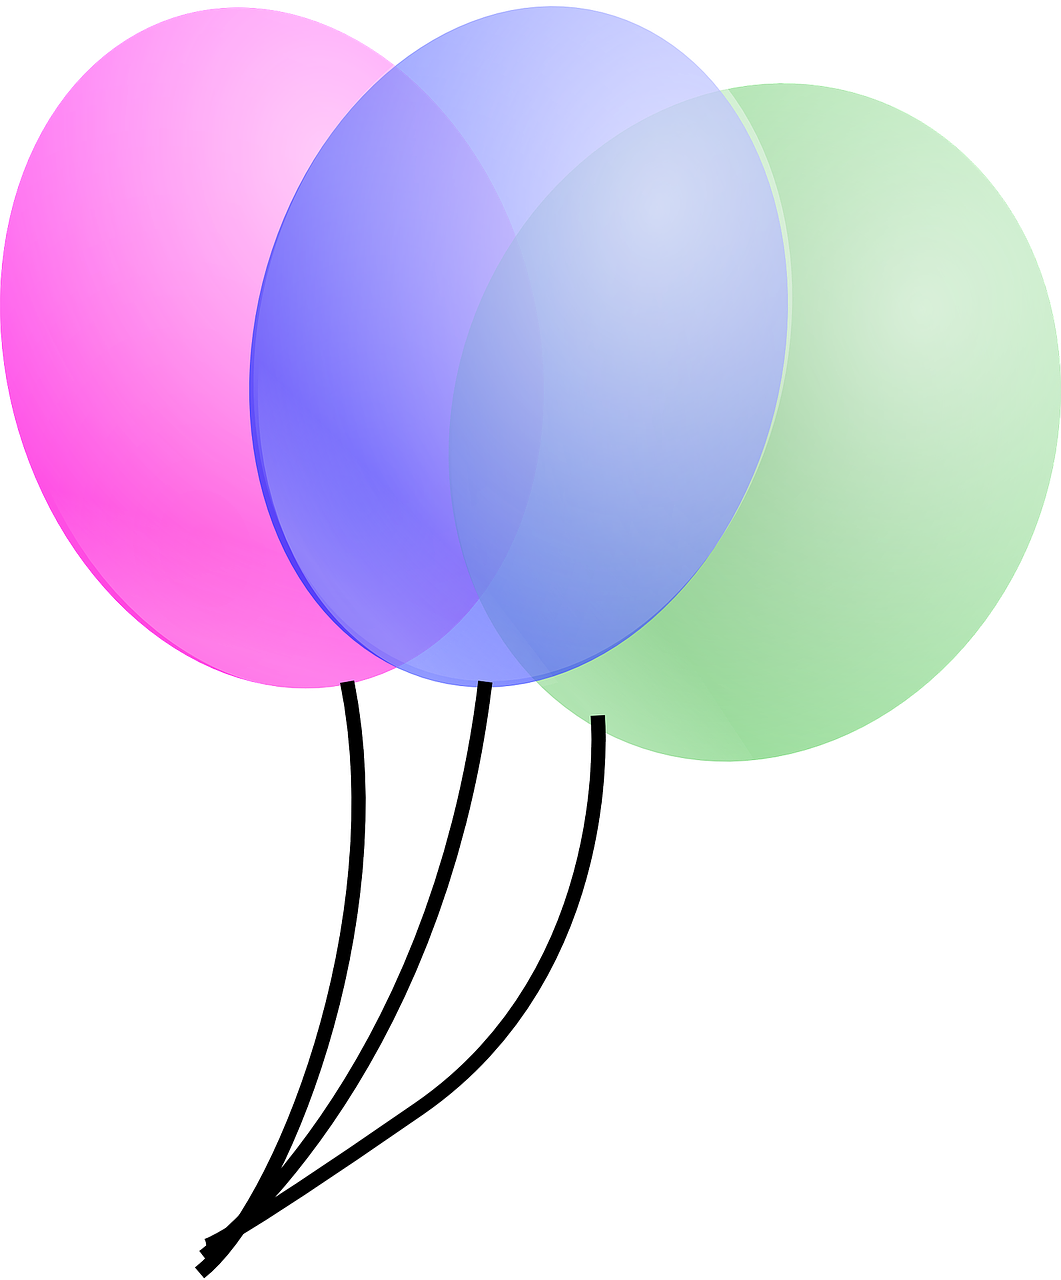 balloons,party,birthday party,festive,celebrate,helium balloons,celebration,inflatable,free vector graphics,free pictures, free photos, free images, royalty free, free illustrations, public domain